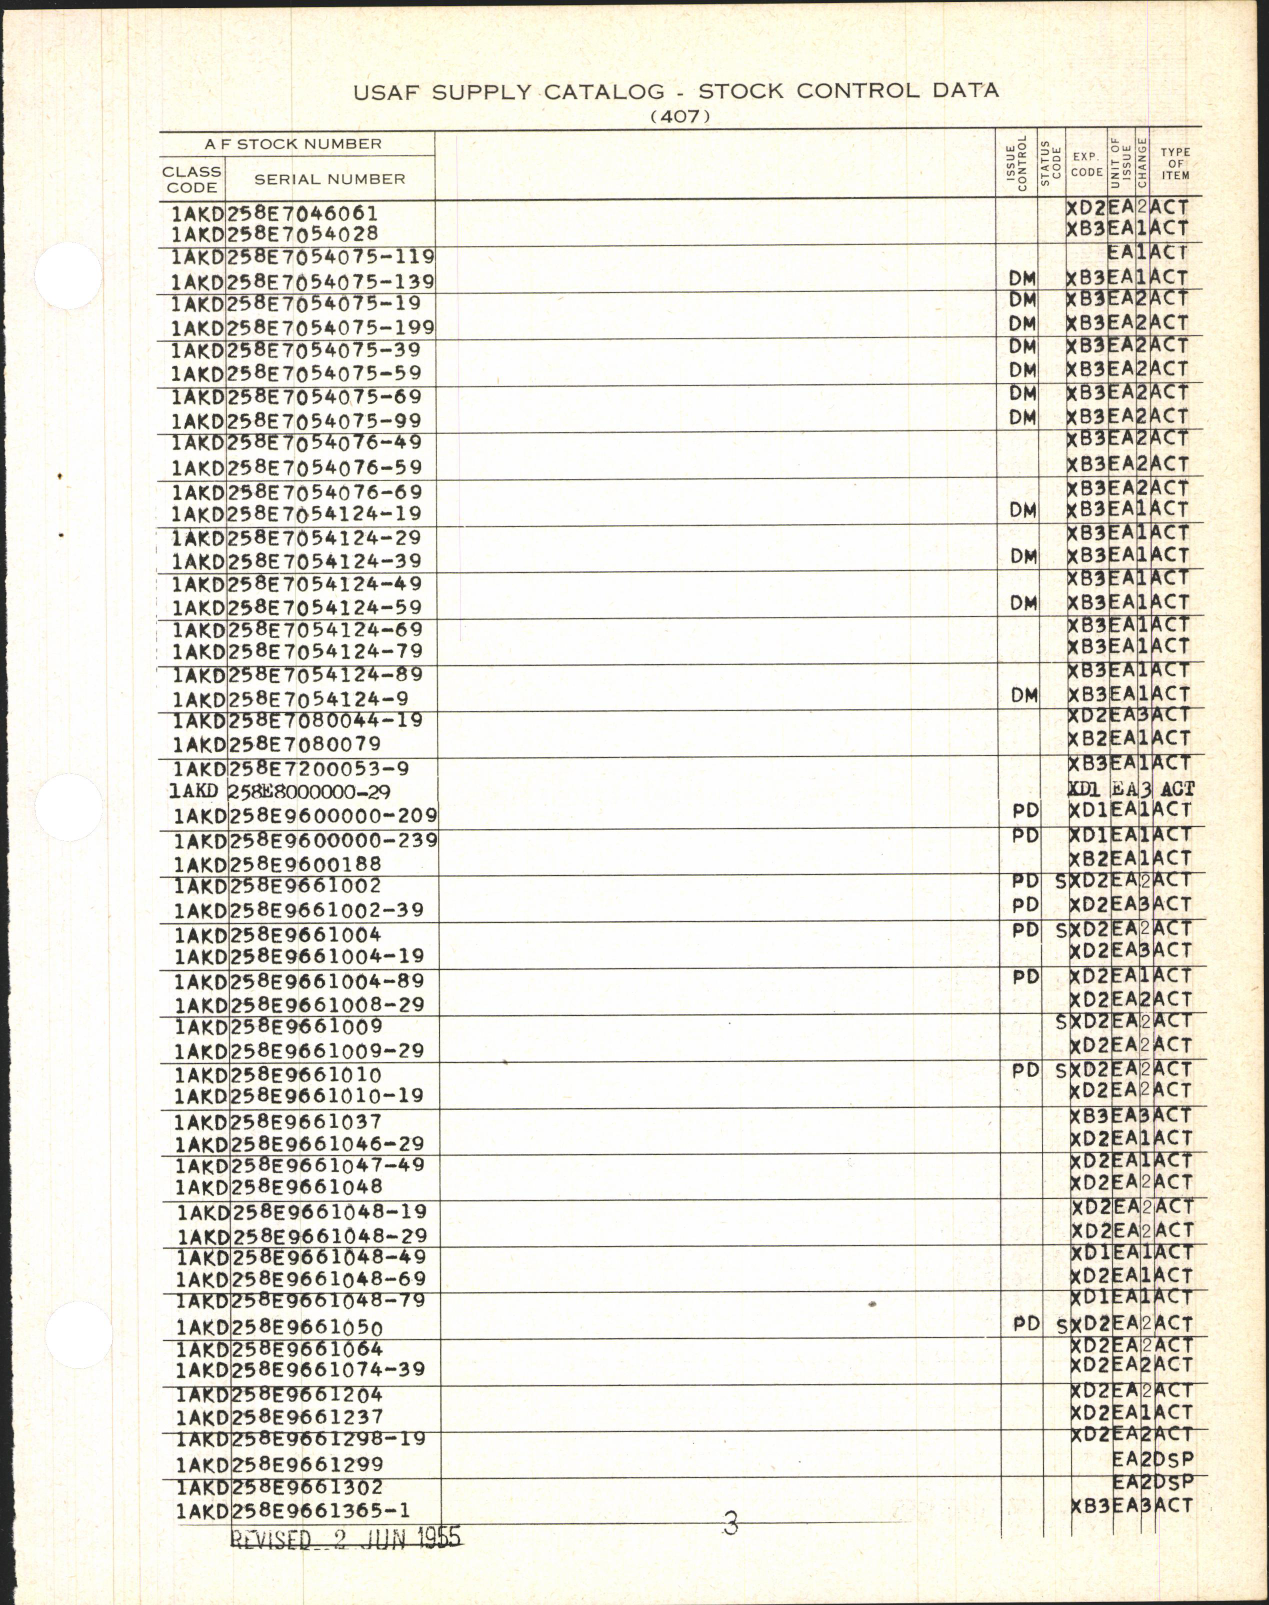 Sample page 5 from AirCorps Library document: Supply Catalog Parts for Martin B-61 Aircraft